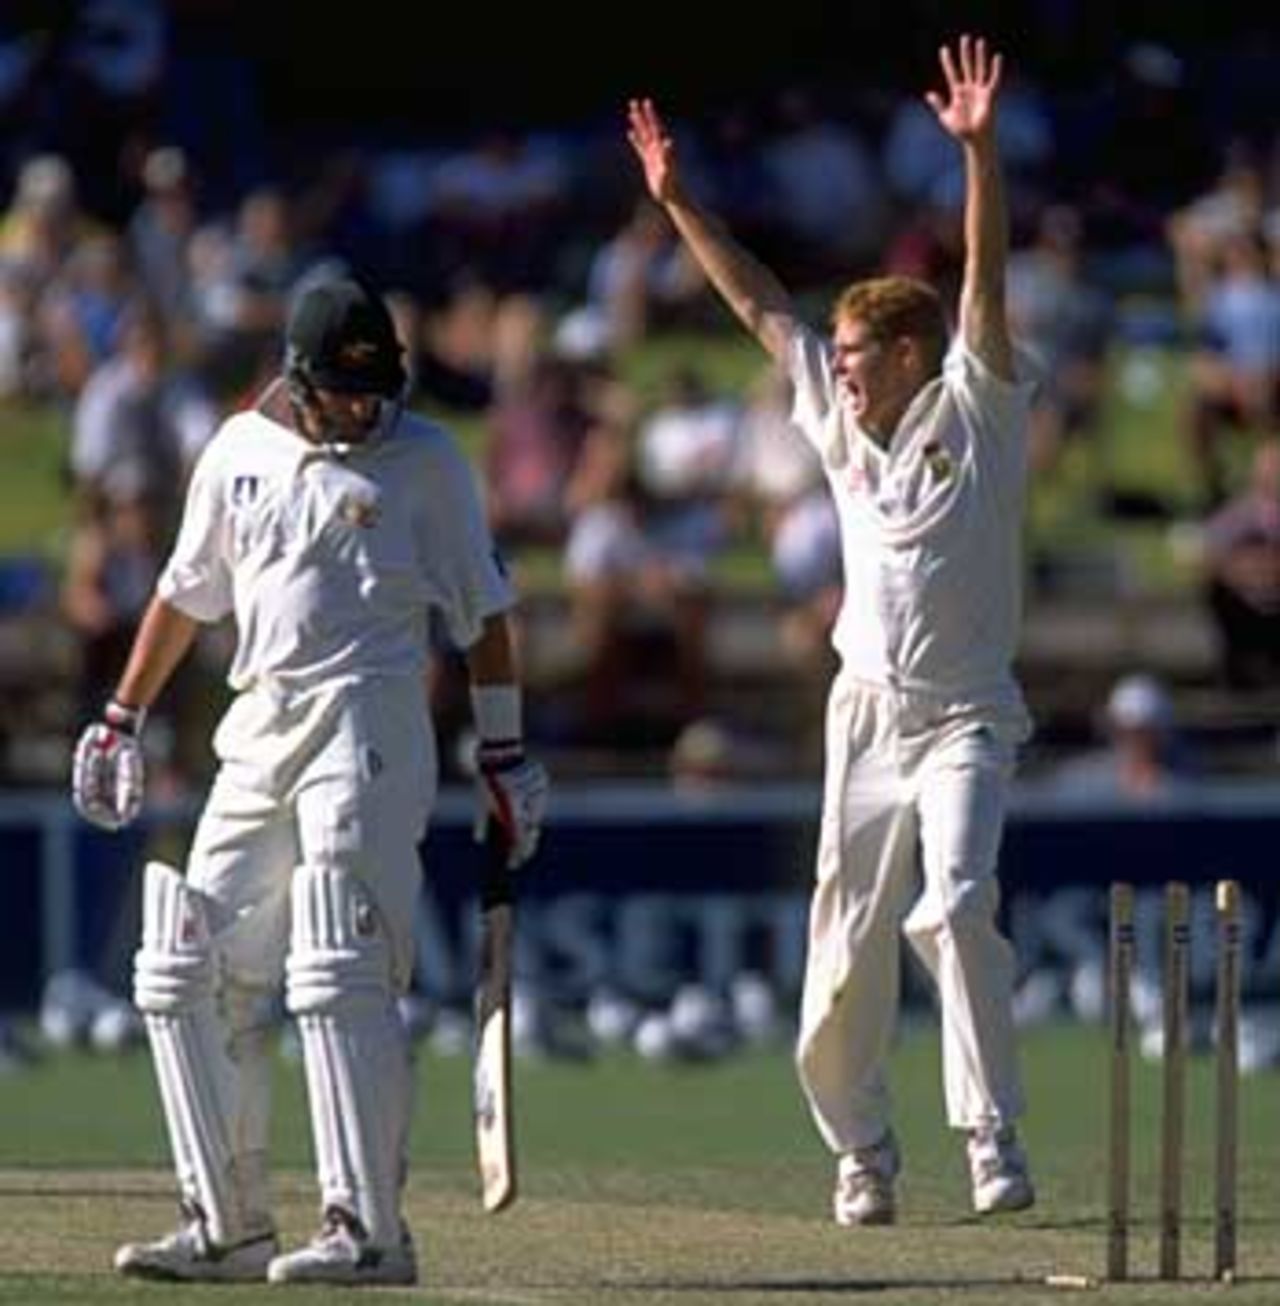 Controversy. A bouncer from Shaun Pollock caused Mark Waugh to clip the stumps, dislodging the bails, but was given not-out, Australia v South Africa, 3rd Test, Adelaide, Jan 30 - Feb 3, 1998